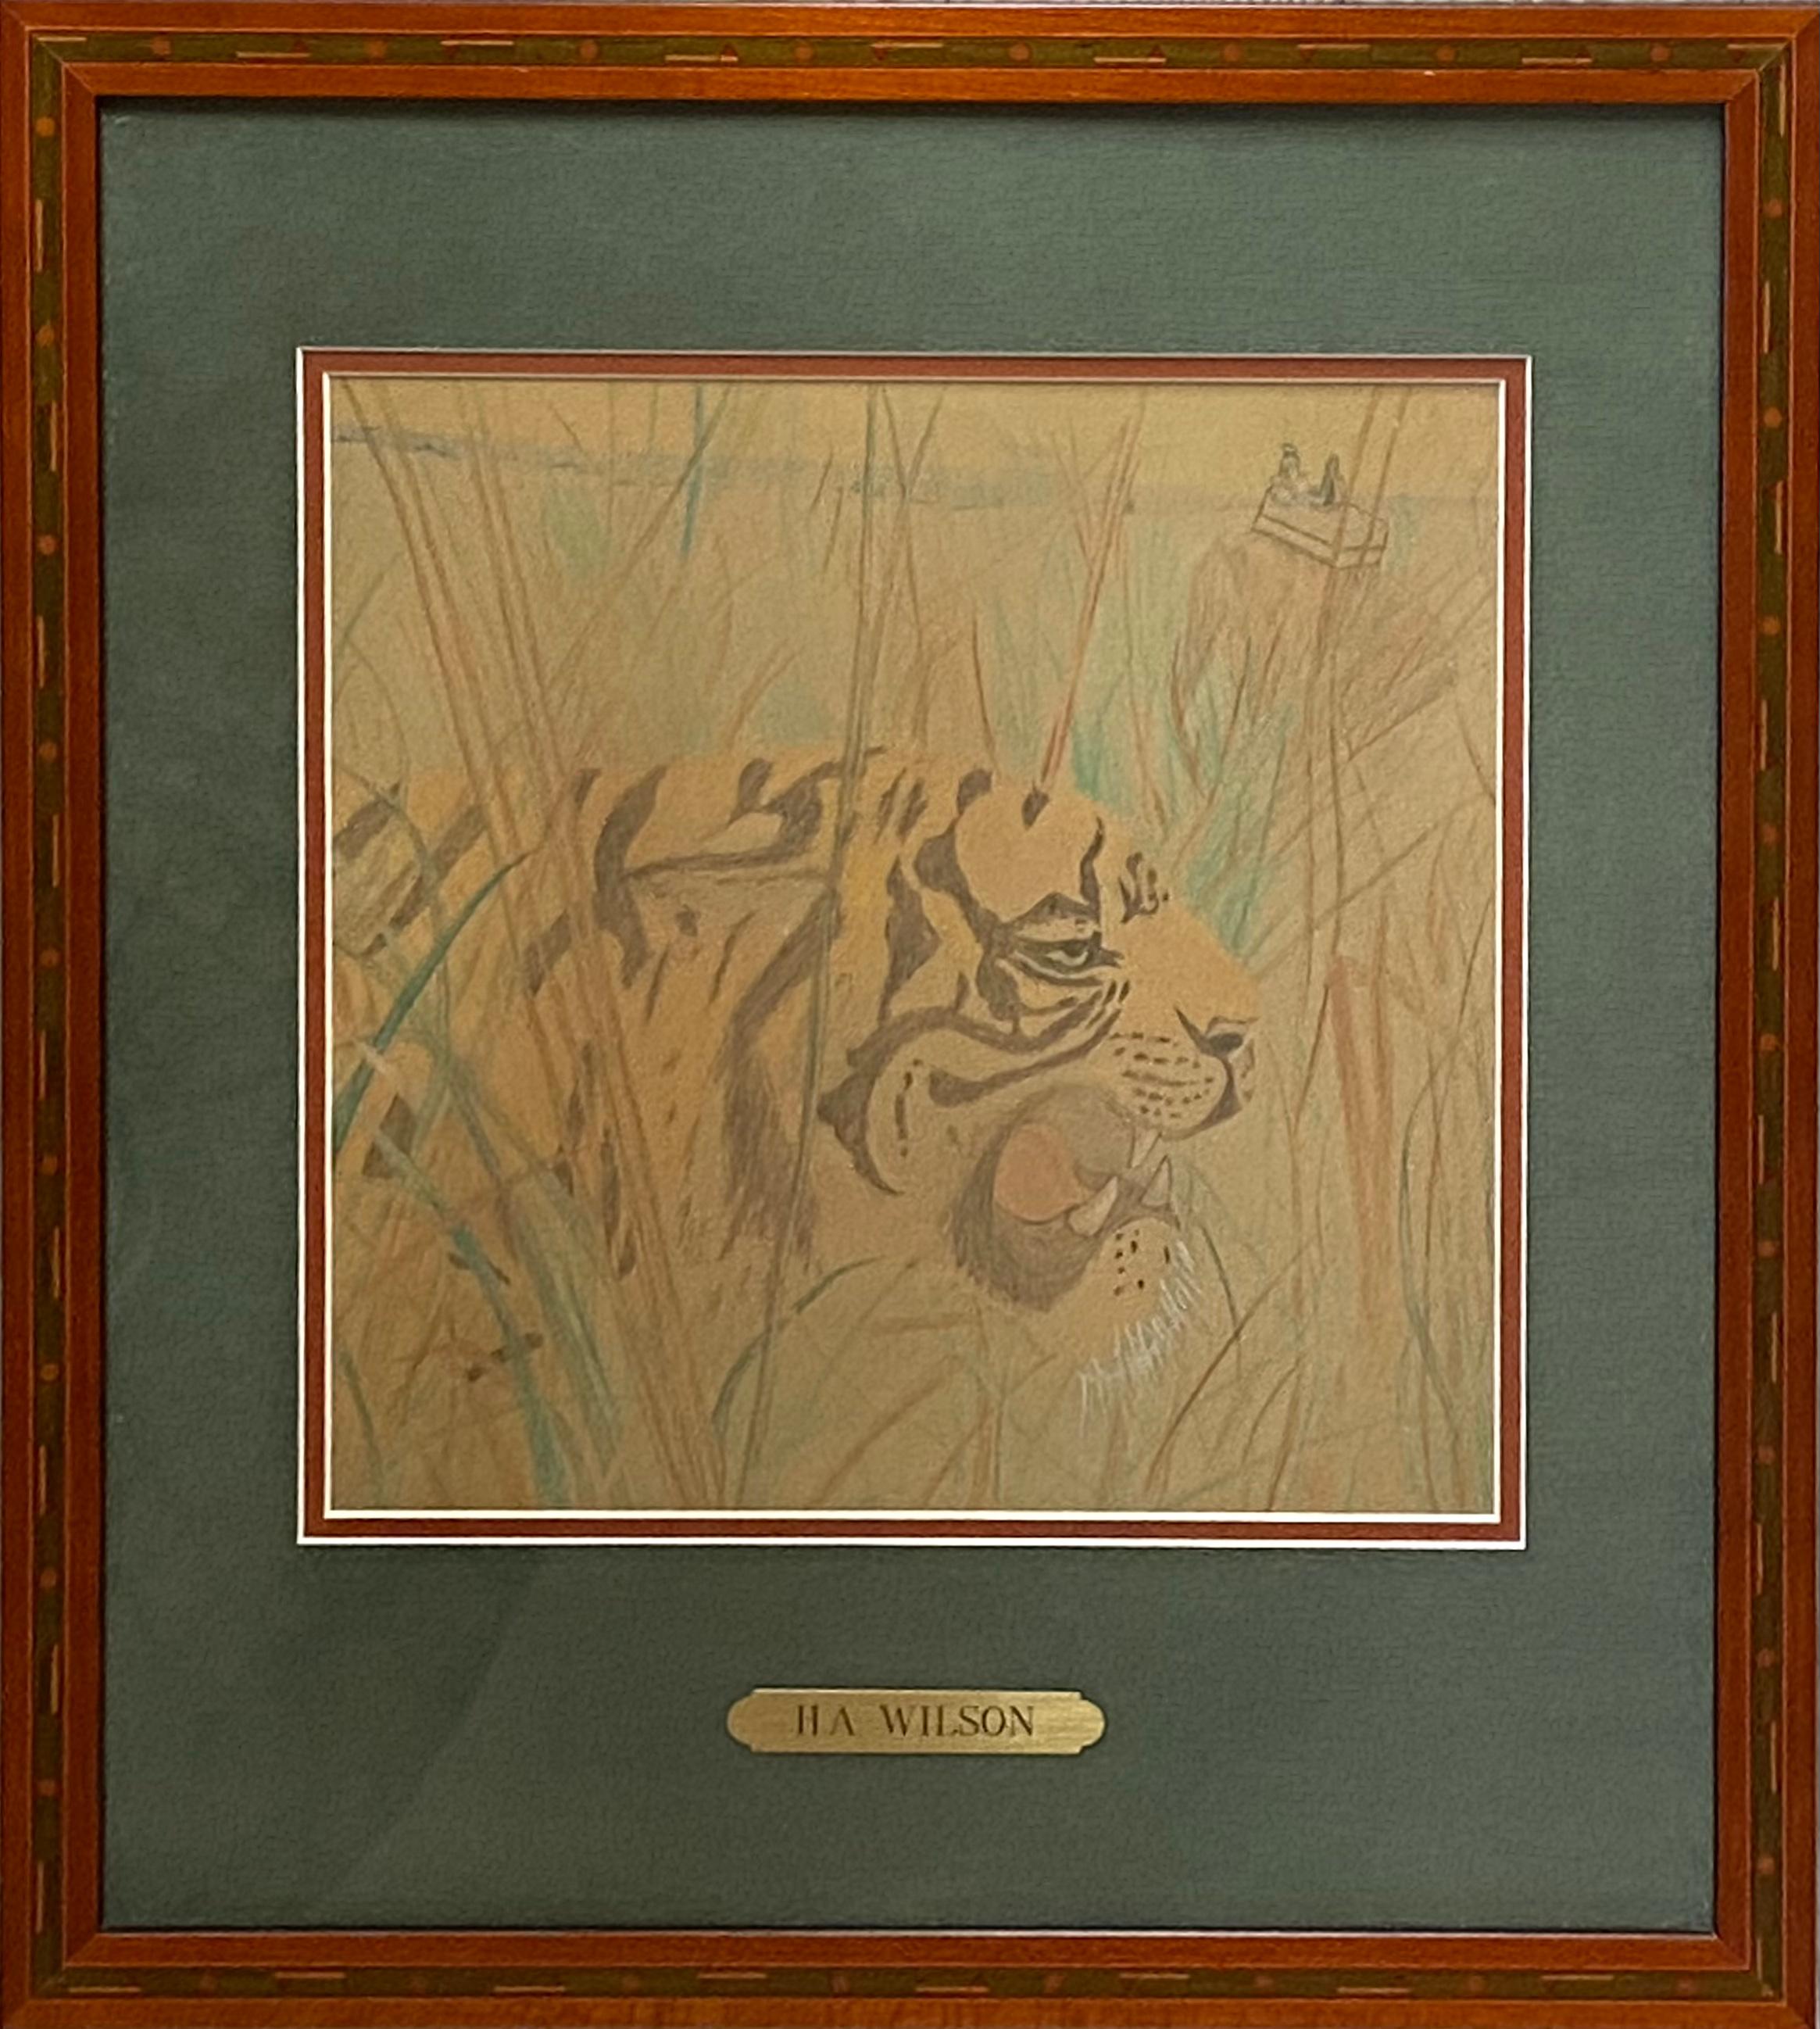 Original colored pencil on archival paper of a tiger in a jungle setting attributed to H.A. Wilson. No visible signature. Not examined out of frame. No current information on the artist. Circa 1985. Condition is excellent. Under glass. Brass artist